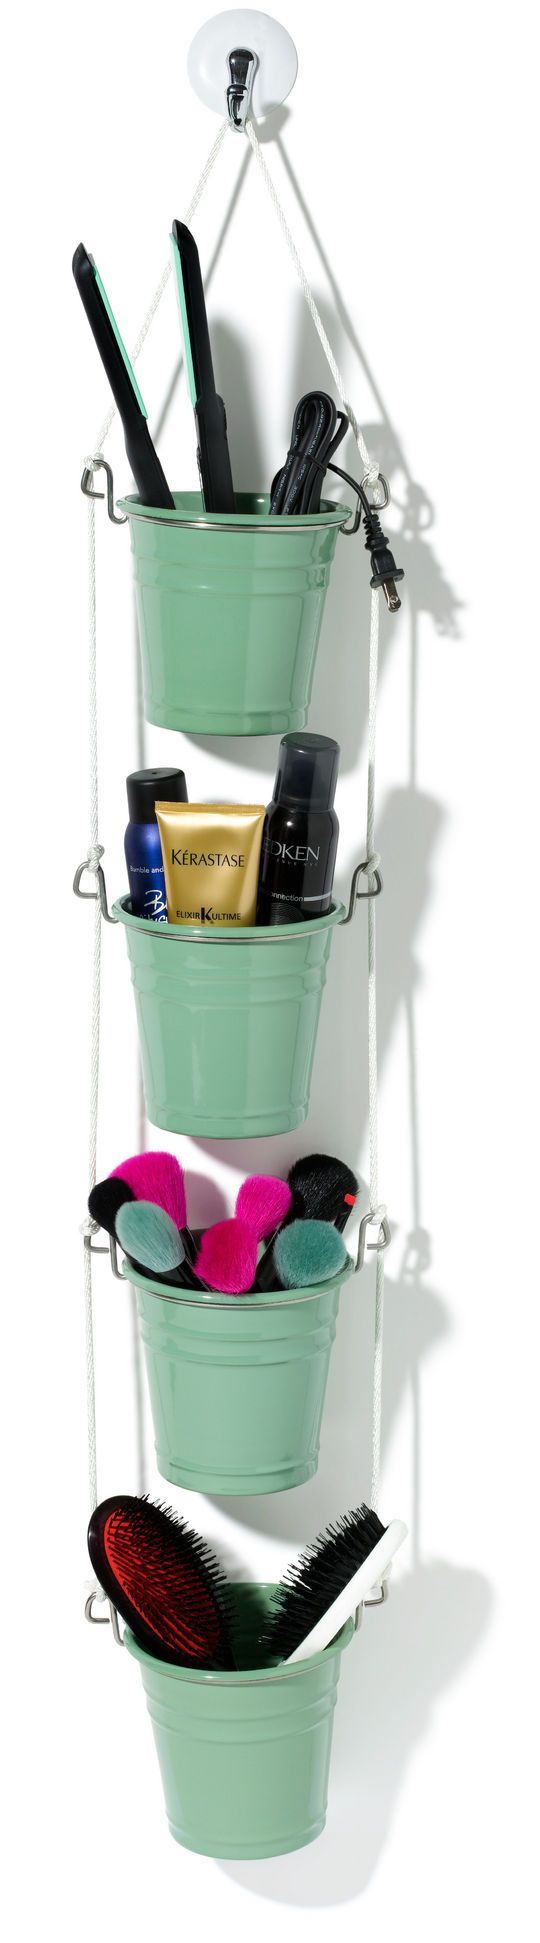 Keep your hair, bath or garden supplies organized with these distinctive hanging buckets, perfect for indoor or outdoor use or as a